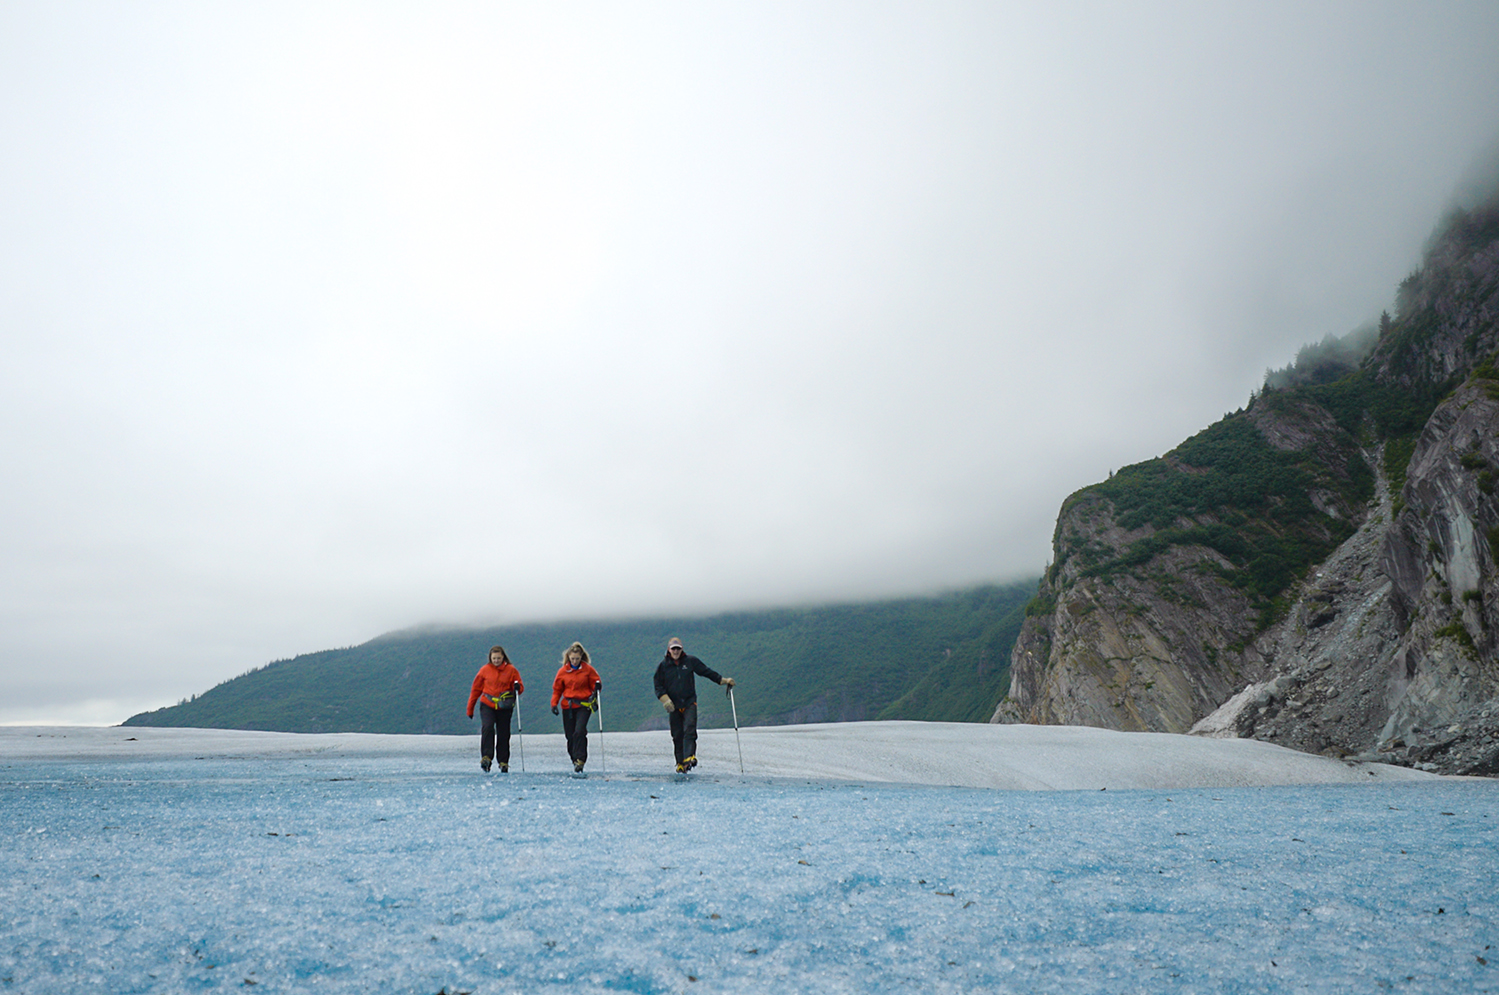 In the new two-part EMBARK episode, “Adventure Alaska,” two Norwegian Cruise Line shoreside team members, adventure to new heights and soar up to Mendenhall Glacier by helicopter for a once-in-a-lifetime trek atop the 13.6 mile-long glacier. The episode provides viewers the chance to discover the best way to experience Alaska with NCL.